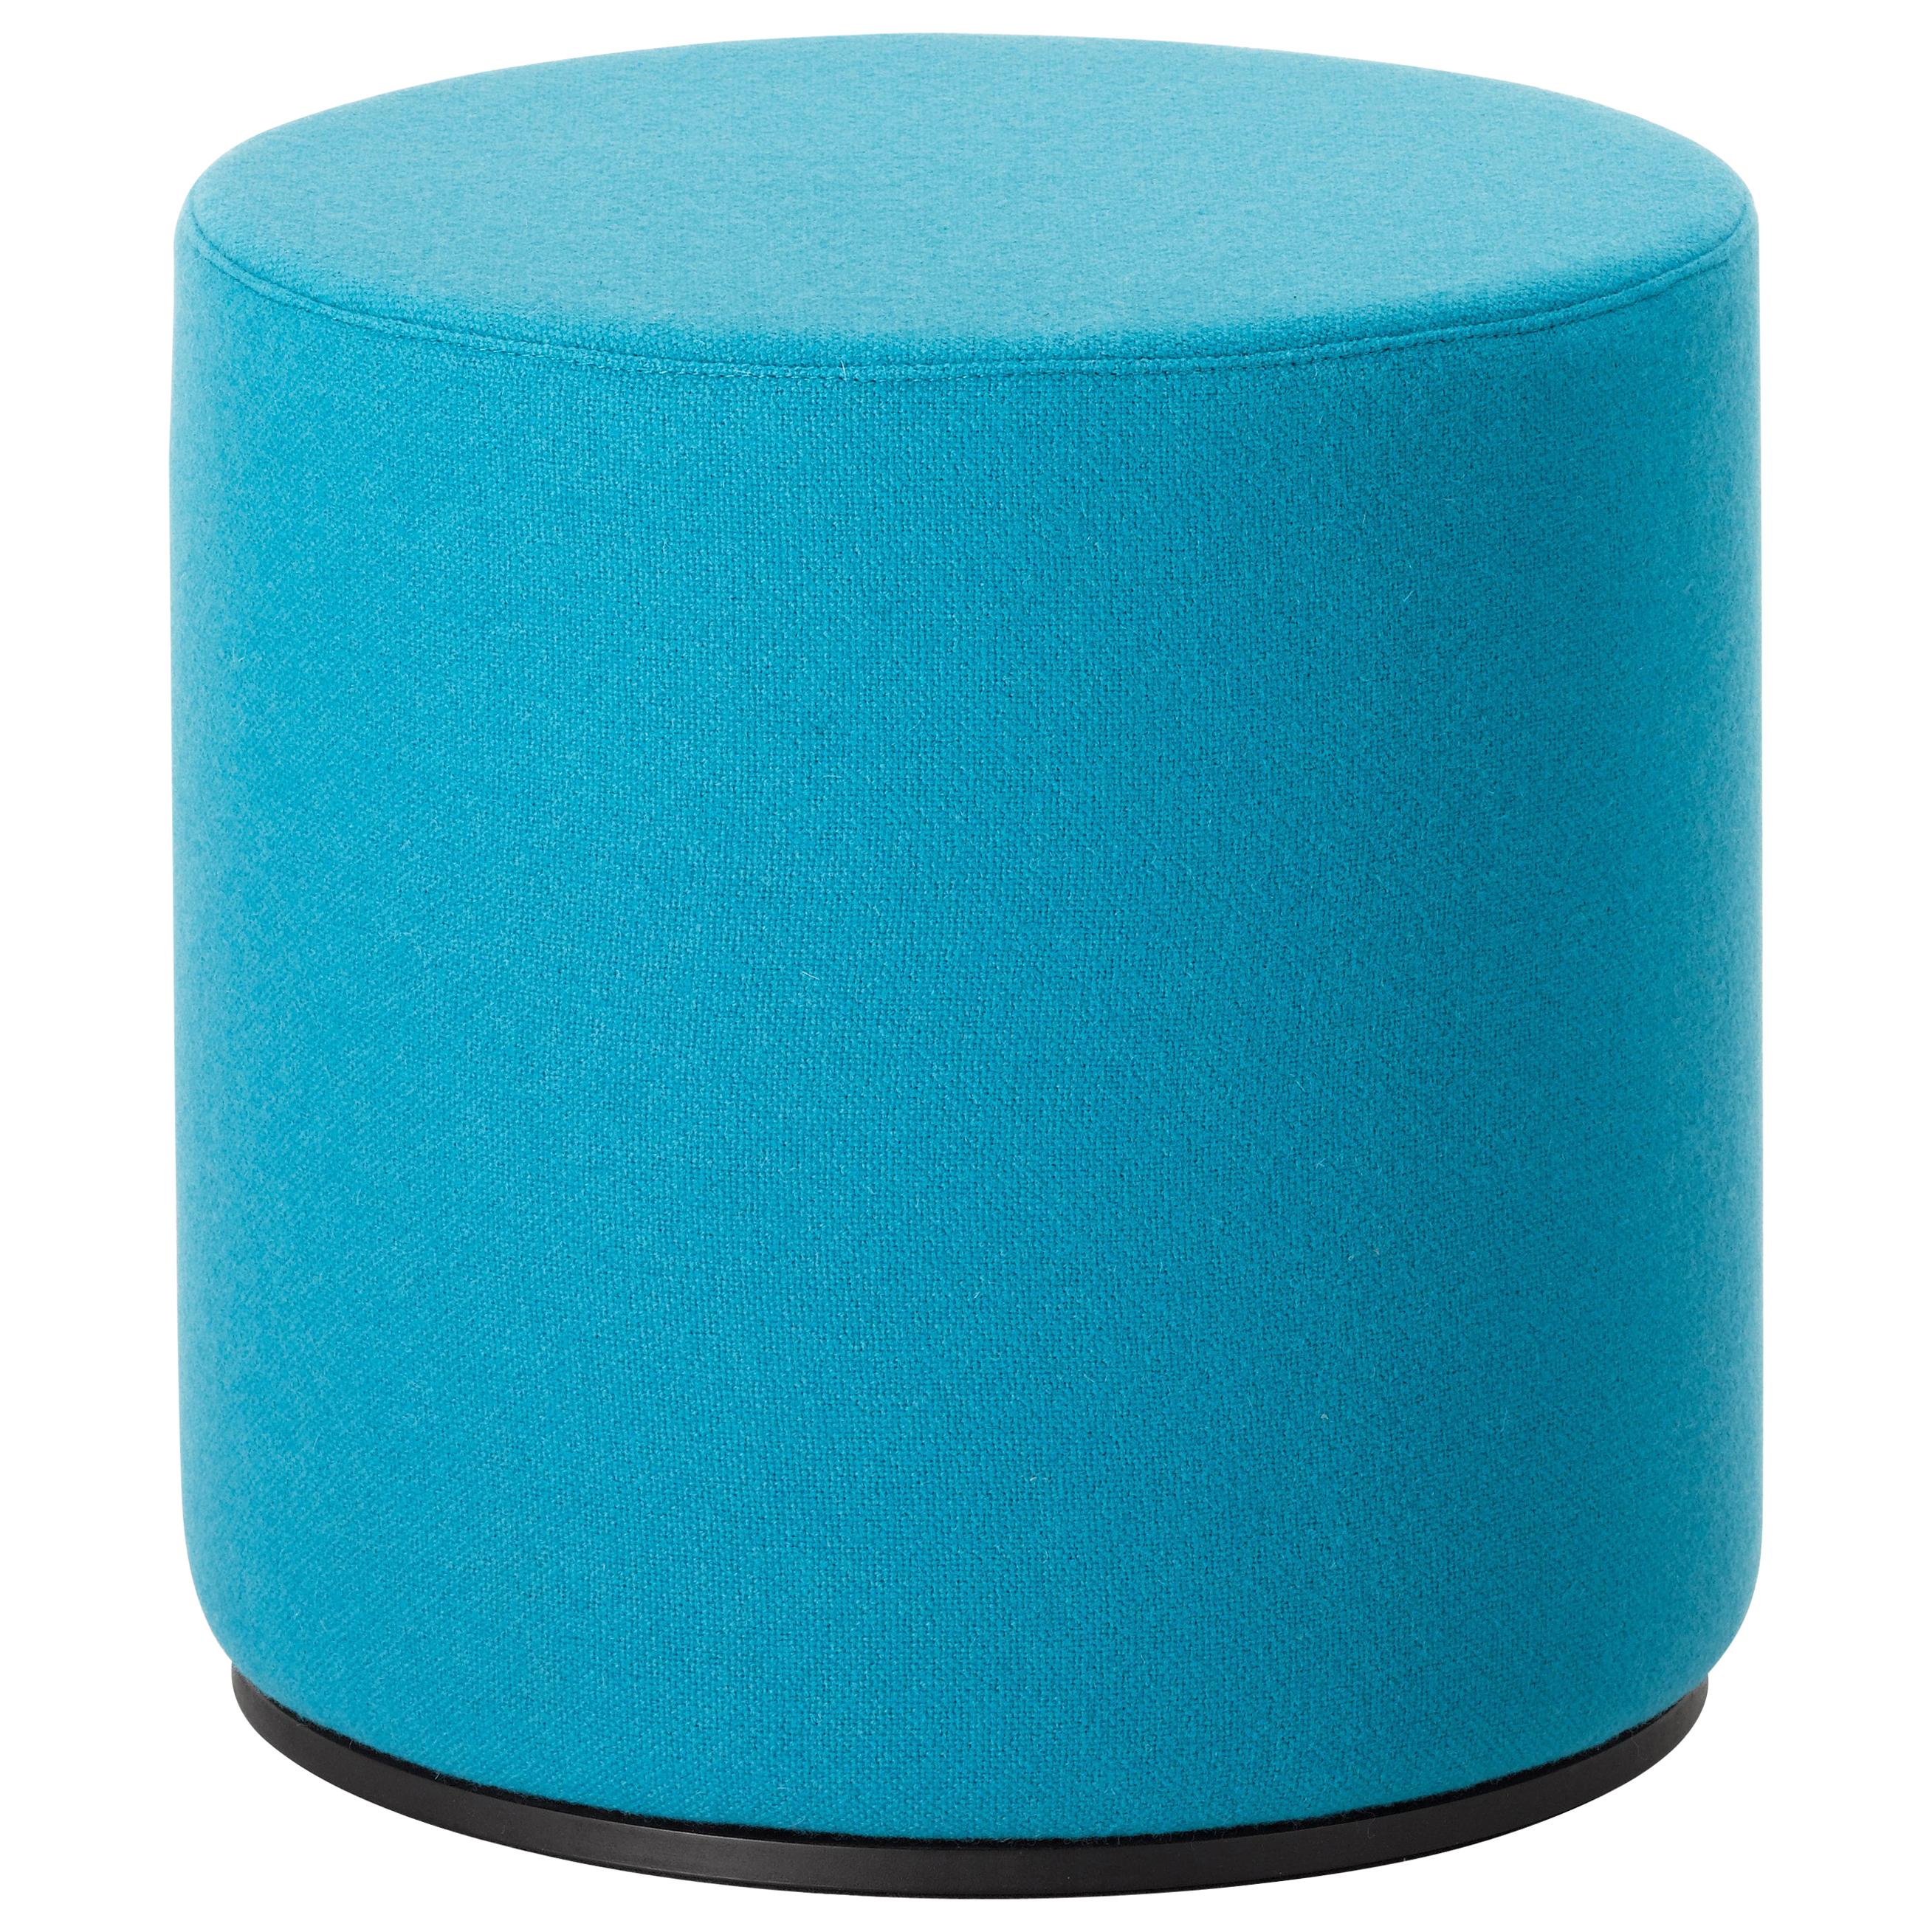 Vitra Panton Visiona Stool in Light Blue by Verner Panton For Sale